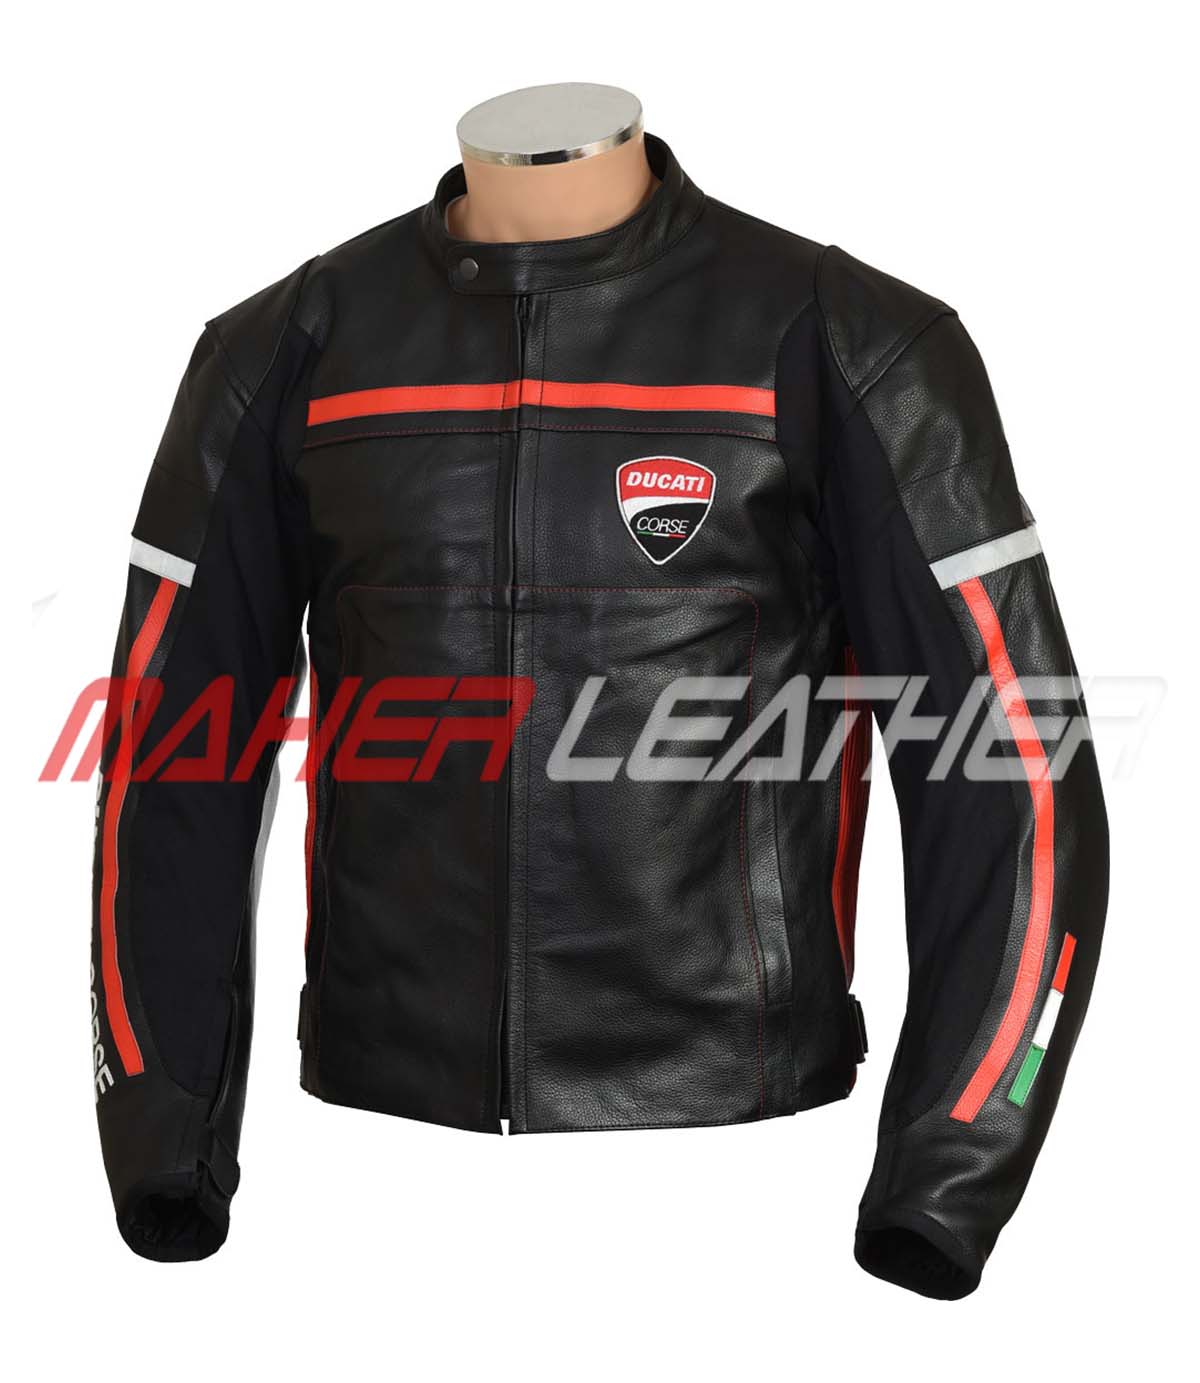 The front look of Black Ducati motorcycle jackets for sale